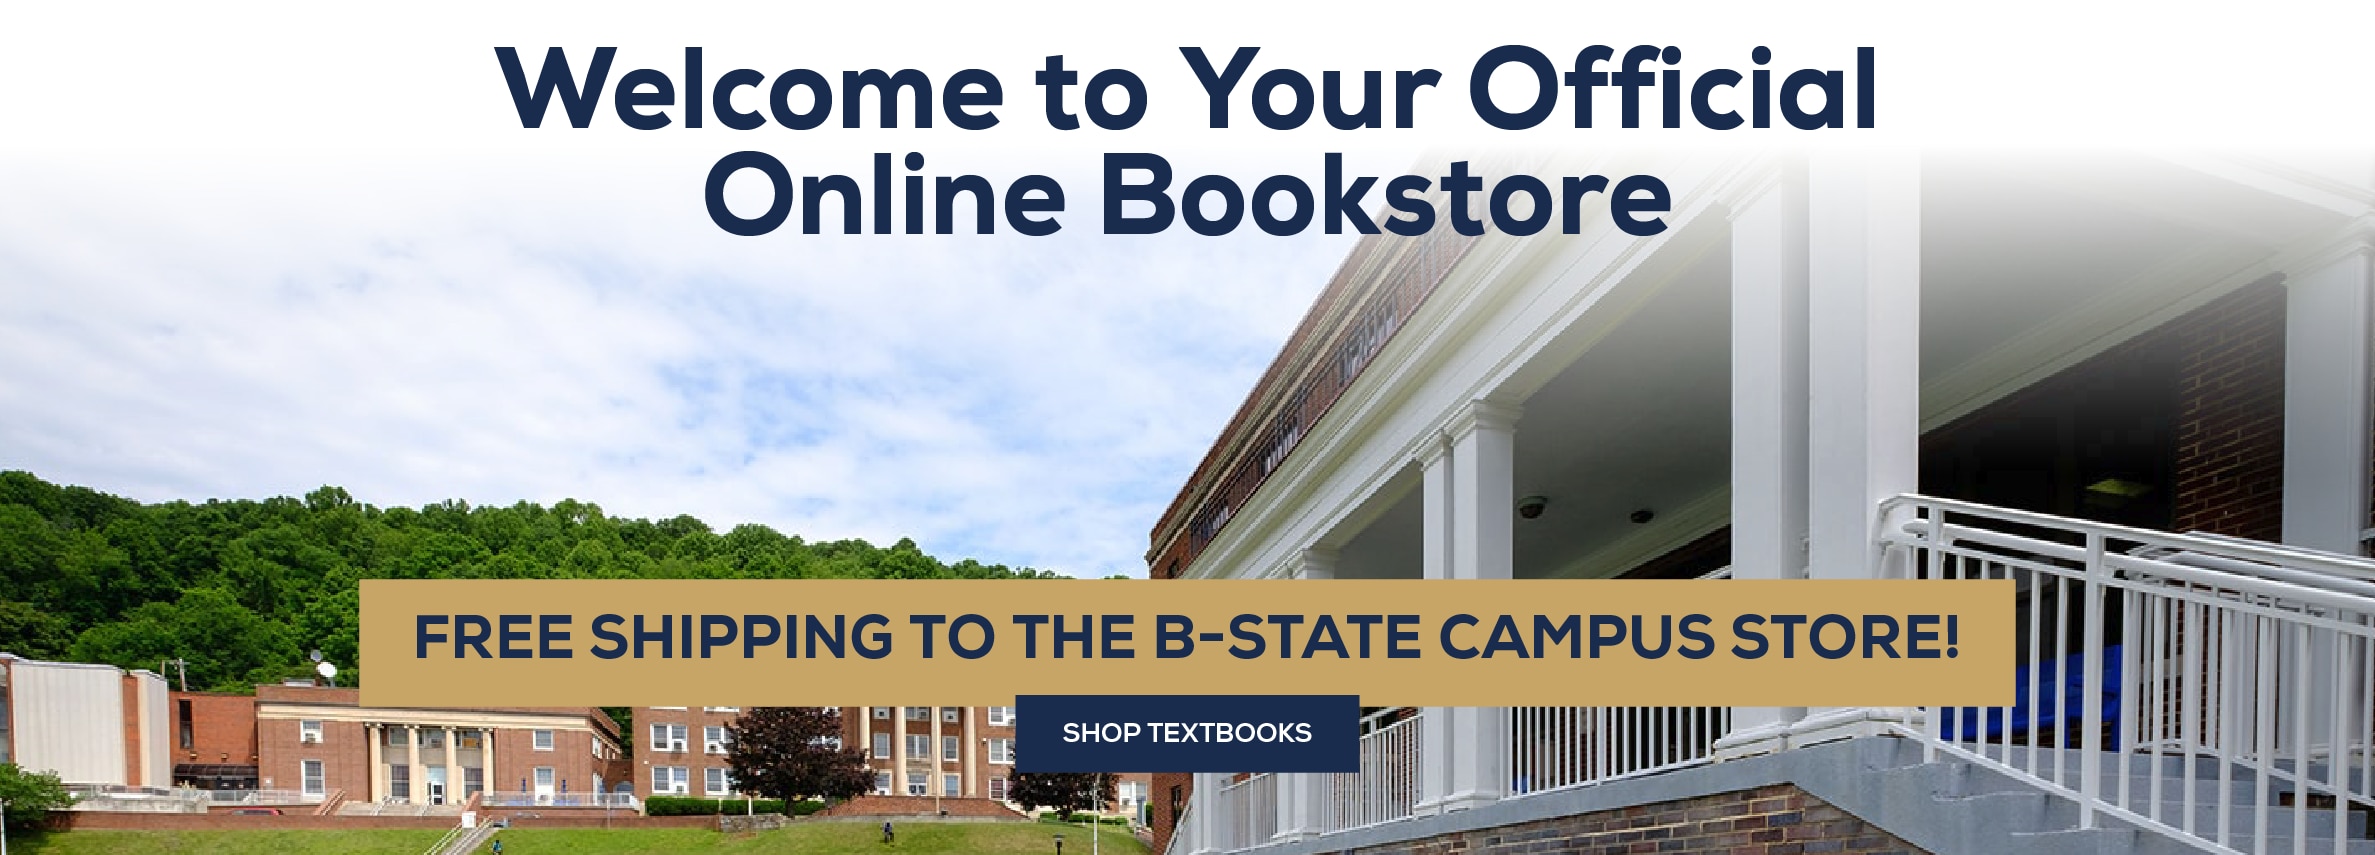 Welcome to Your Official Online Bookstore. Free Shipping to the B-State Campus Store. Shop Textbooks.